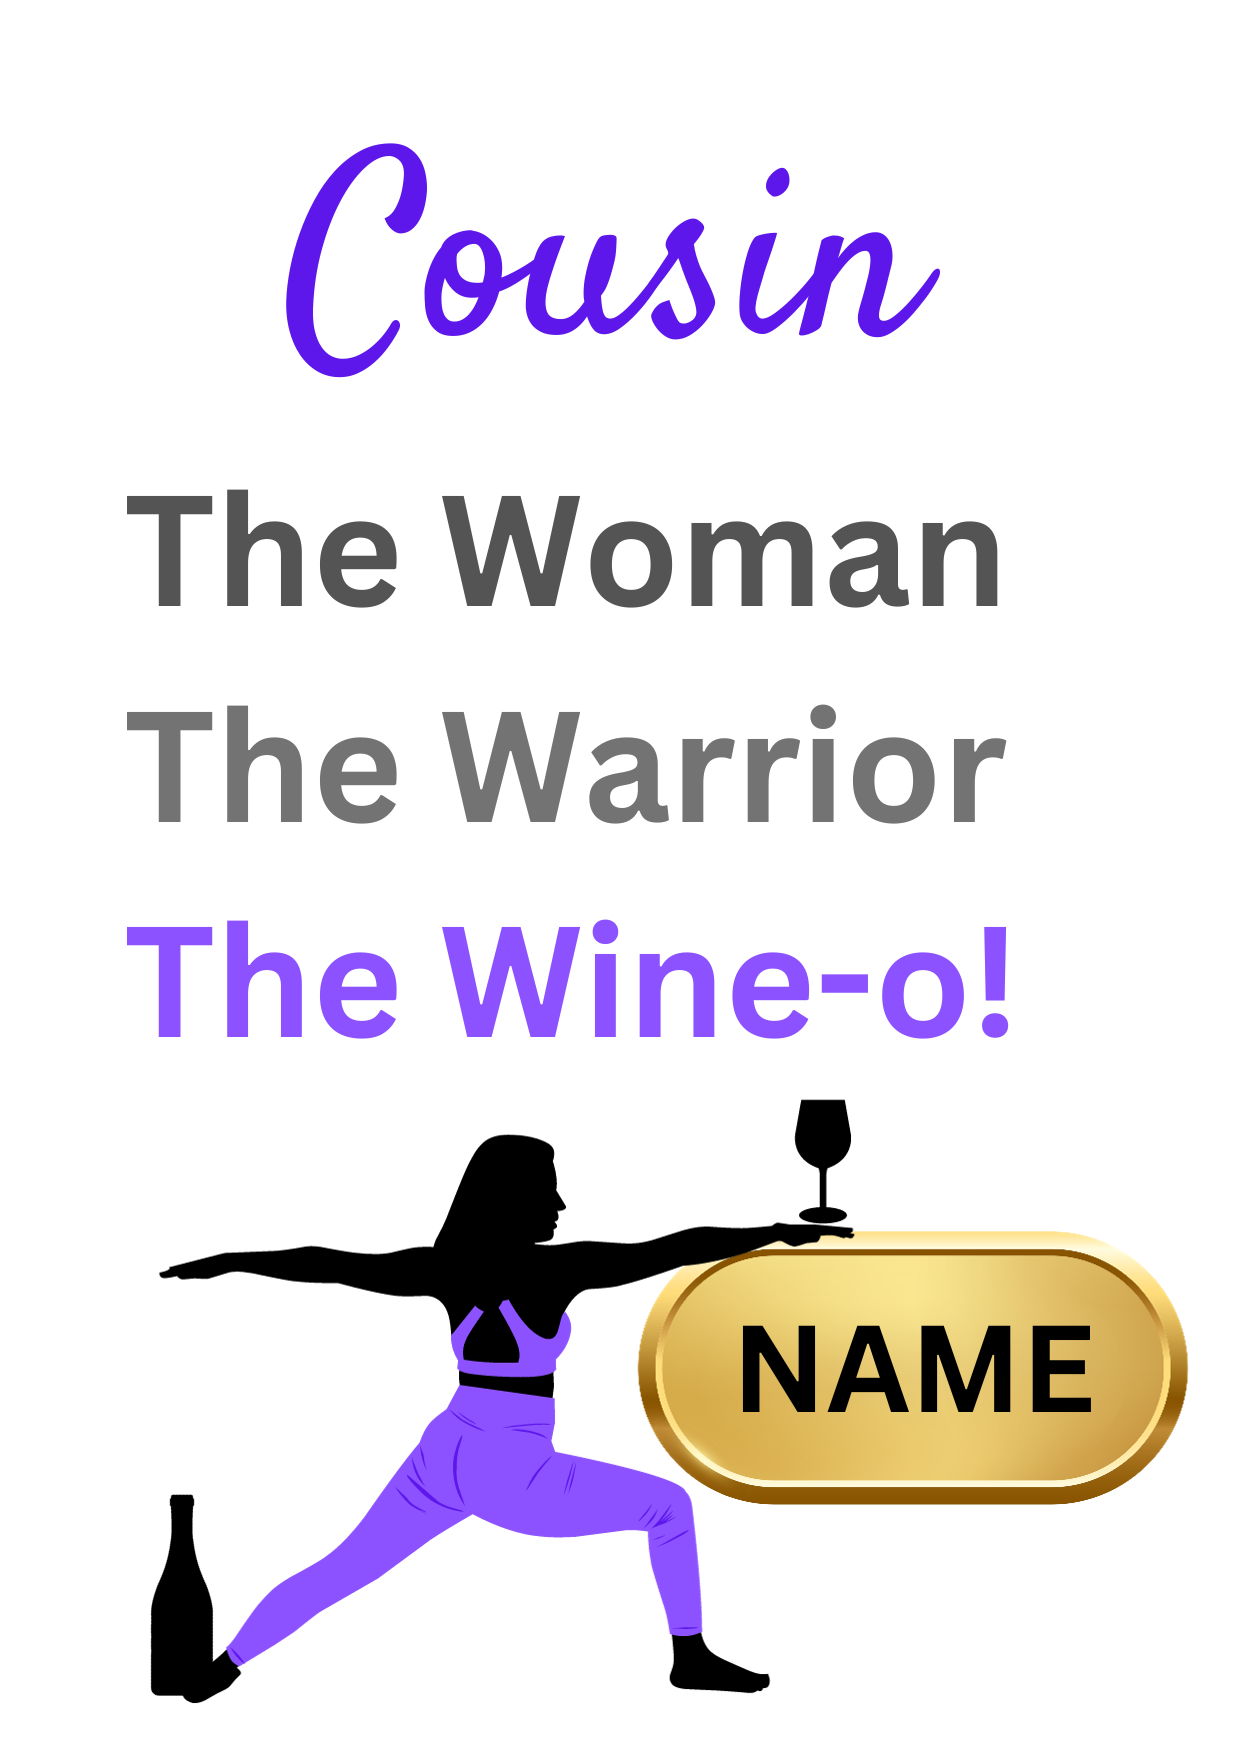 Image shows Birthday Card with the words Friend The Woman, The Warrior, The Wine-o! with picture of woman in the warrior yoga pose with a wine bottle at the feet, holding a large glass of wine which is balanced on a gold plaque for personalised name. 